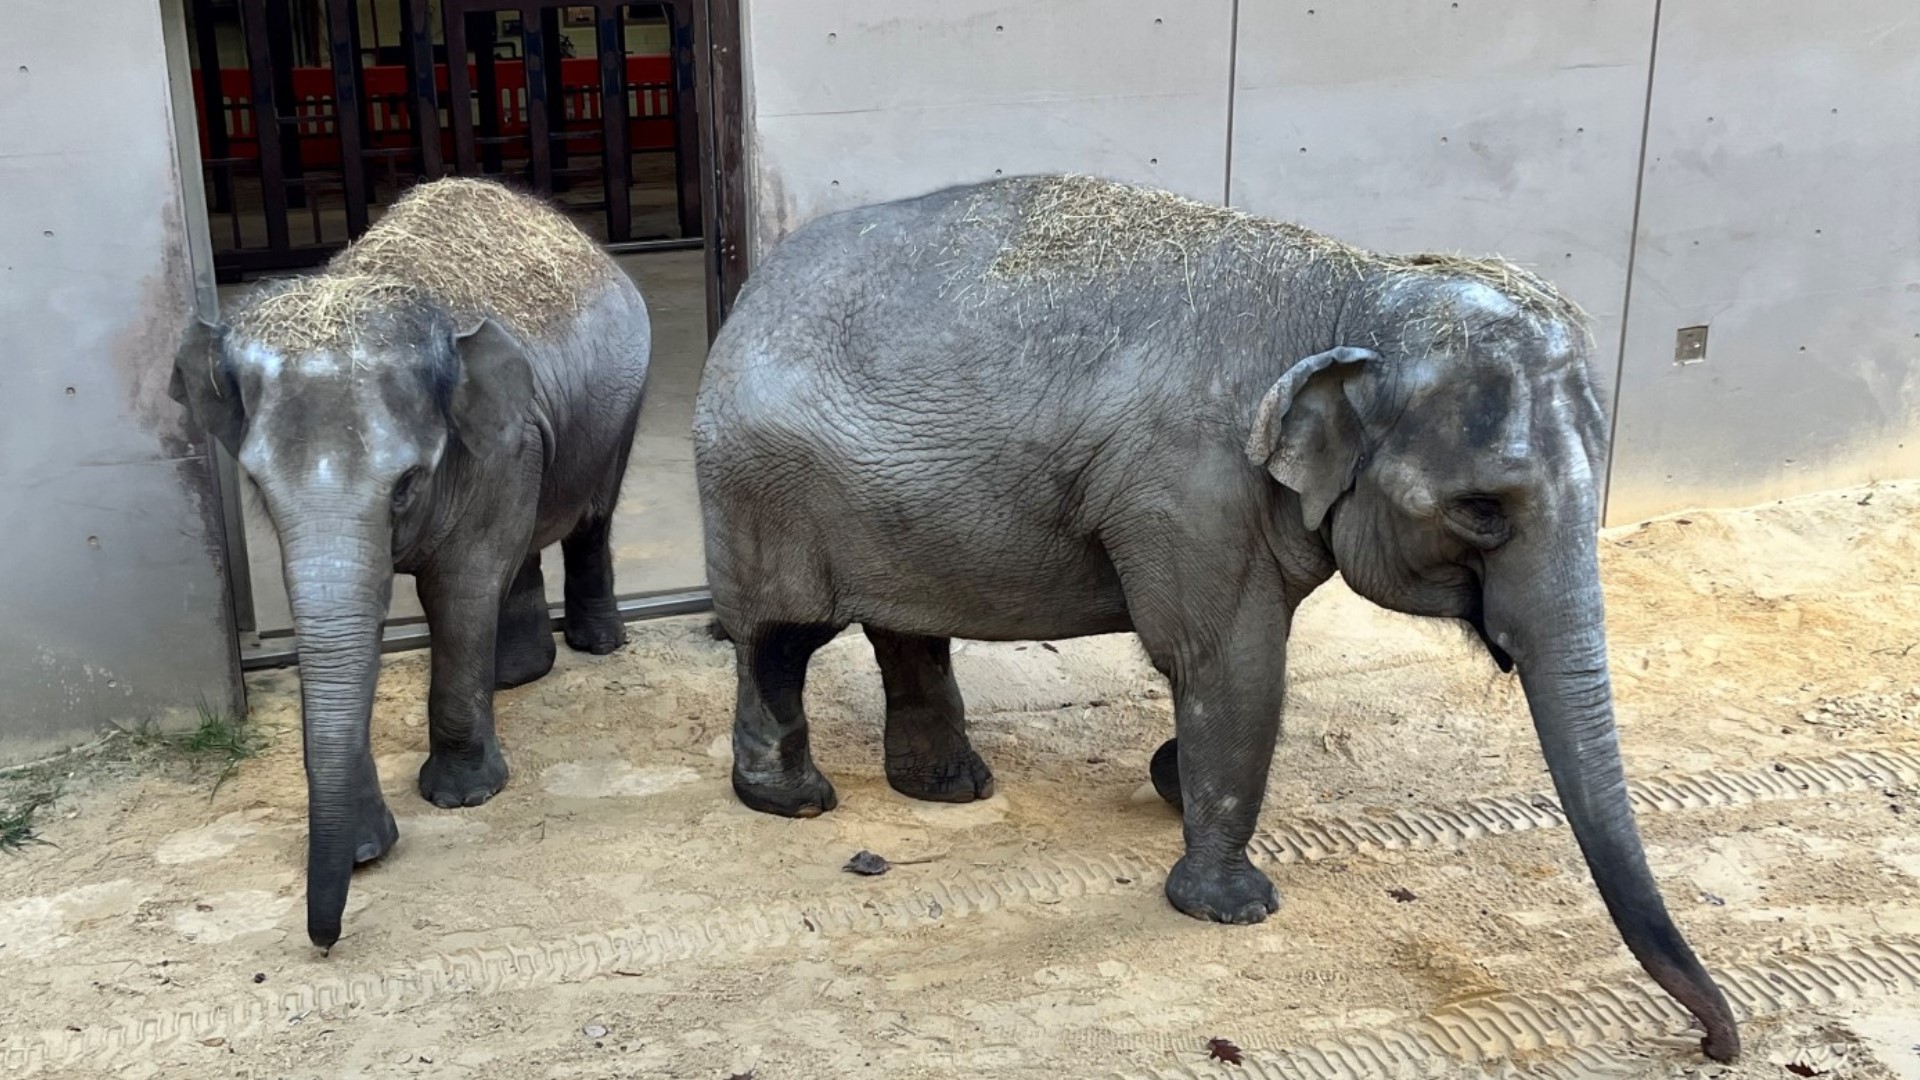 Trong Nhi, 19, and her 9-year-old daughter Nhi Linh will join the elephants after they've finished their quarantine period.